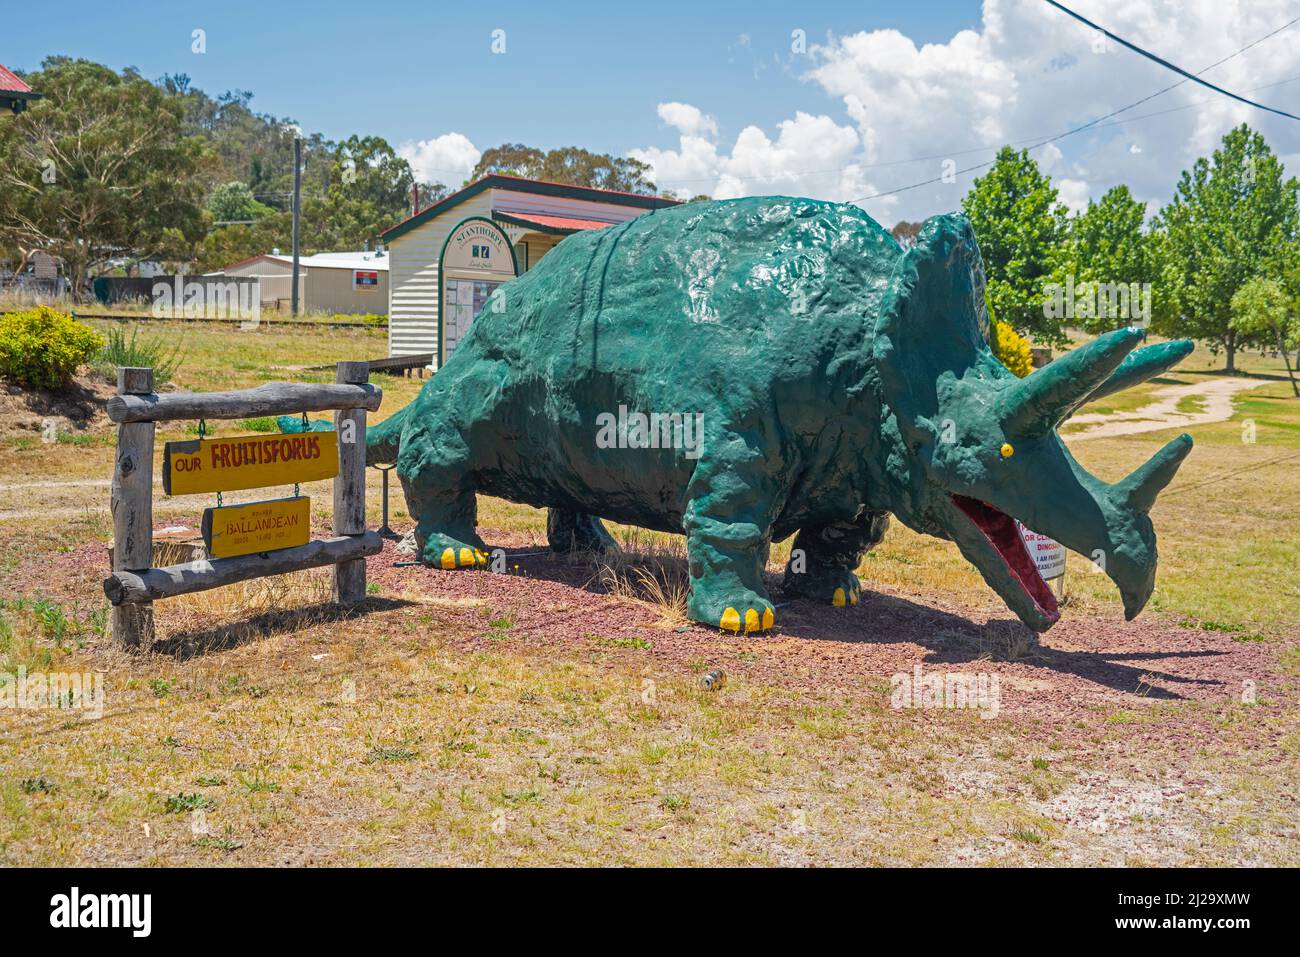 The Balladean railway station is a well-known landmark on the New England Highway due to the big dinosaur in front of it, nicknamed the Fruitisforus. Stock Photo